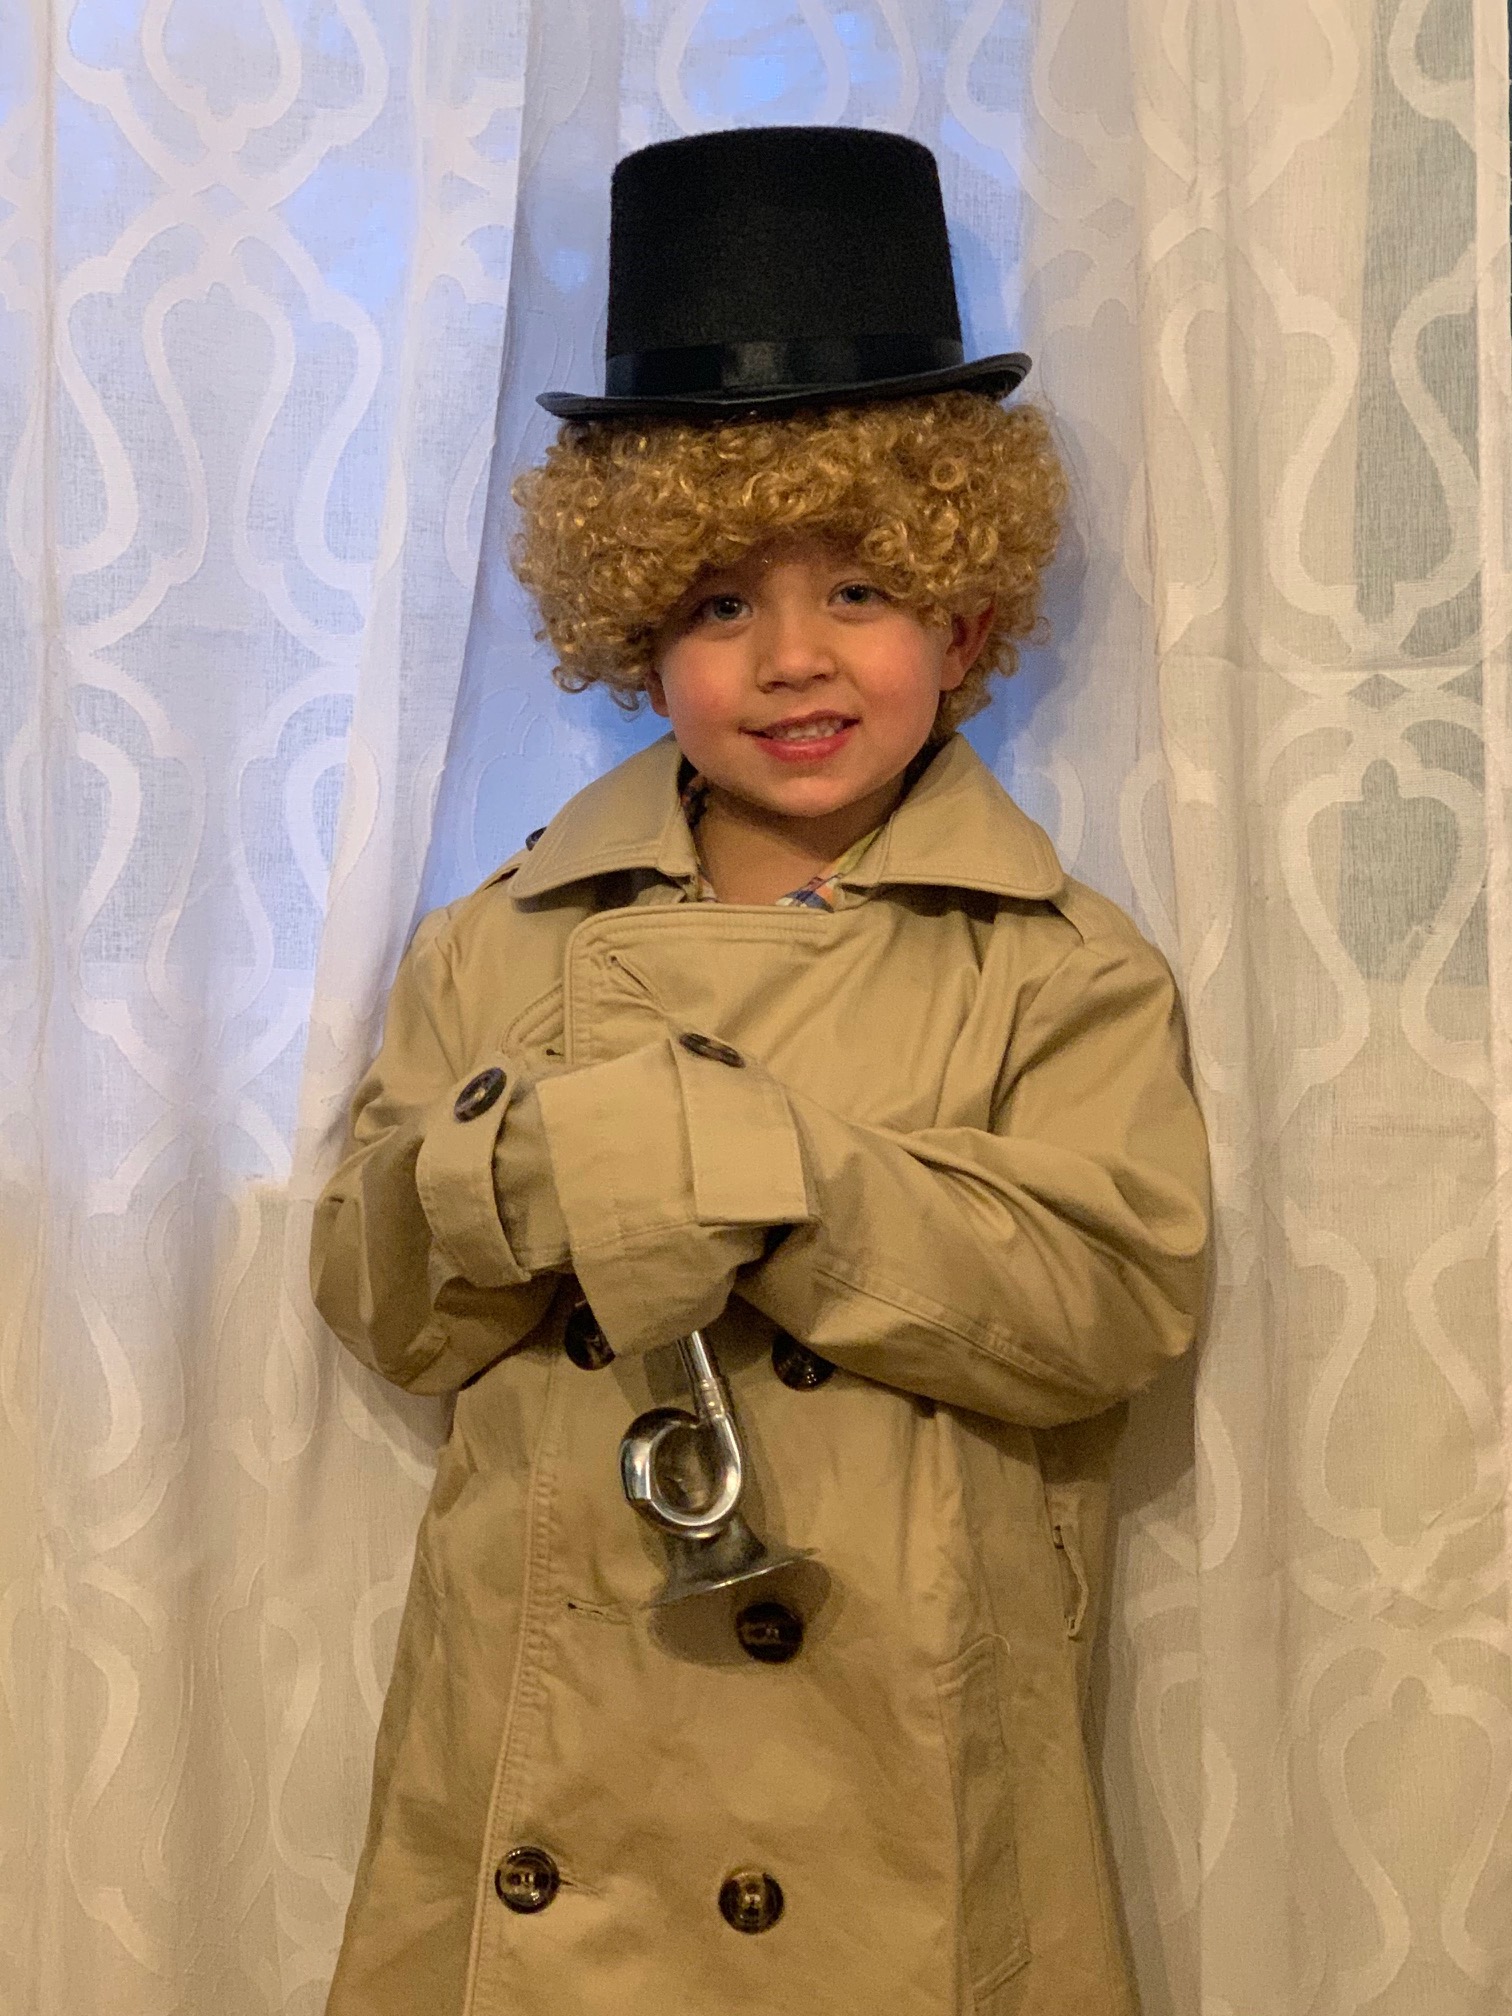 This photo shows a young boy dressed up as Harpo Marx, complete with trench coat, top hat, and blonde wig